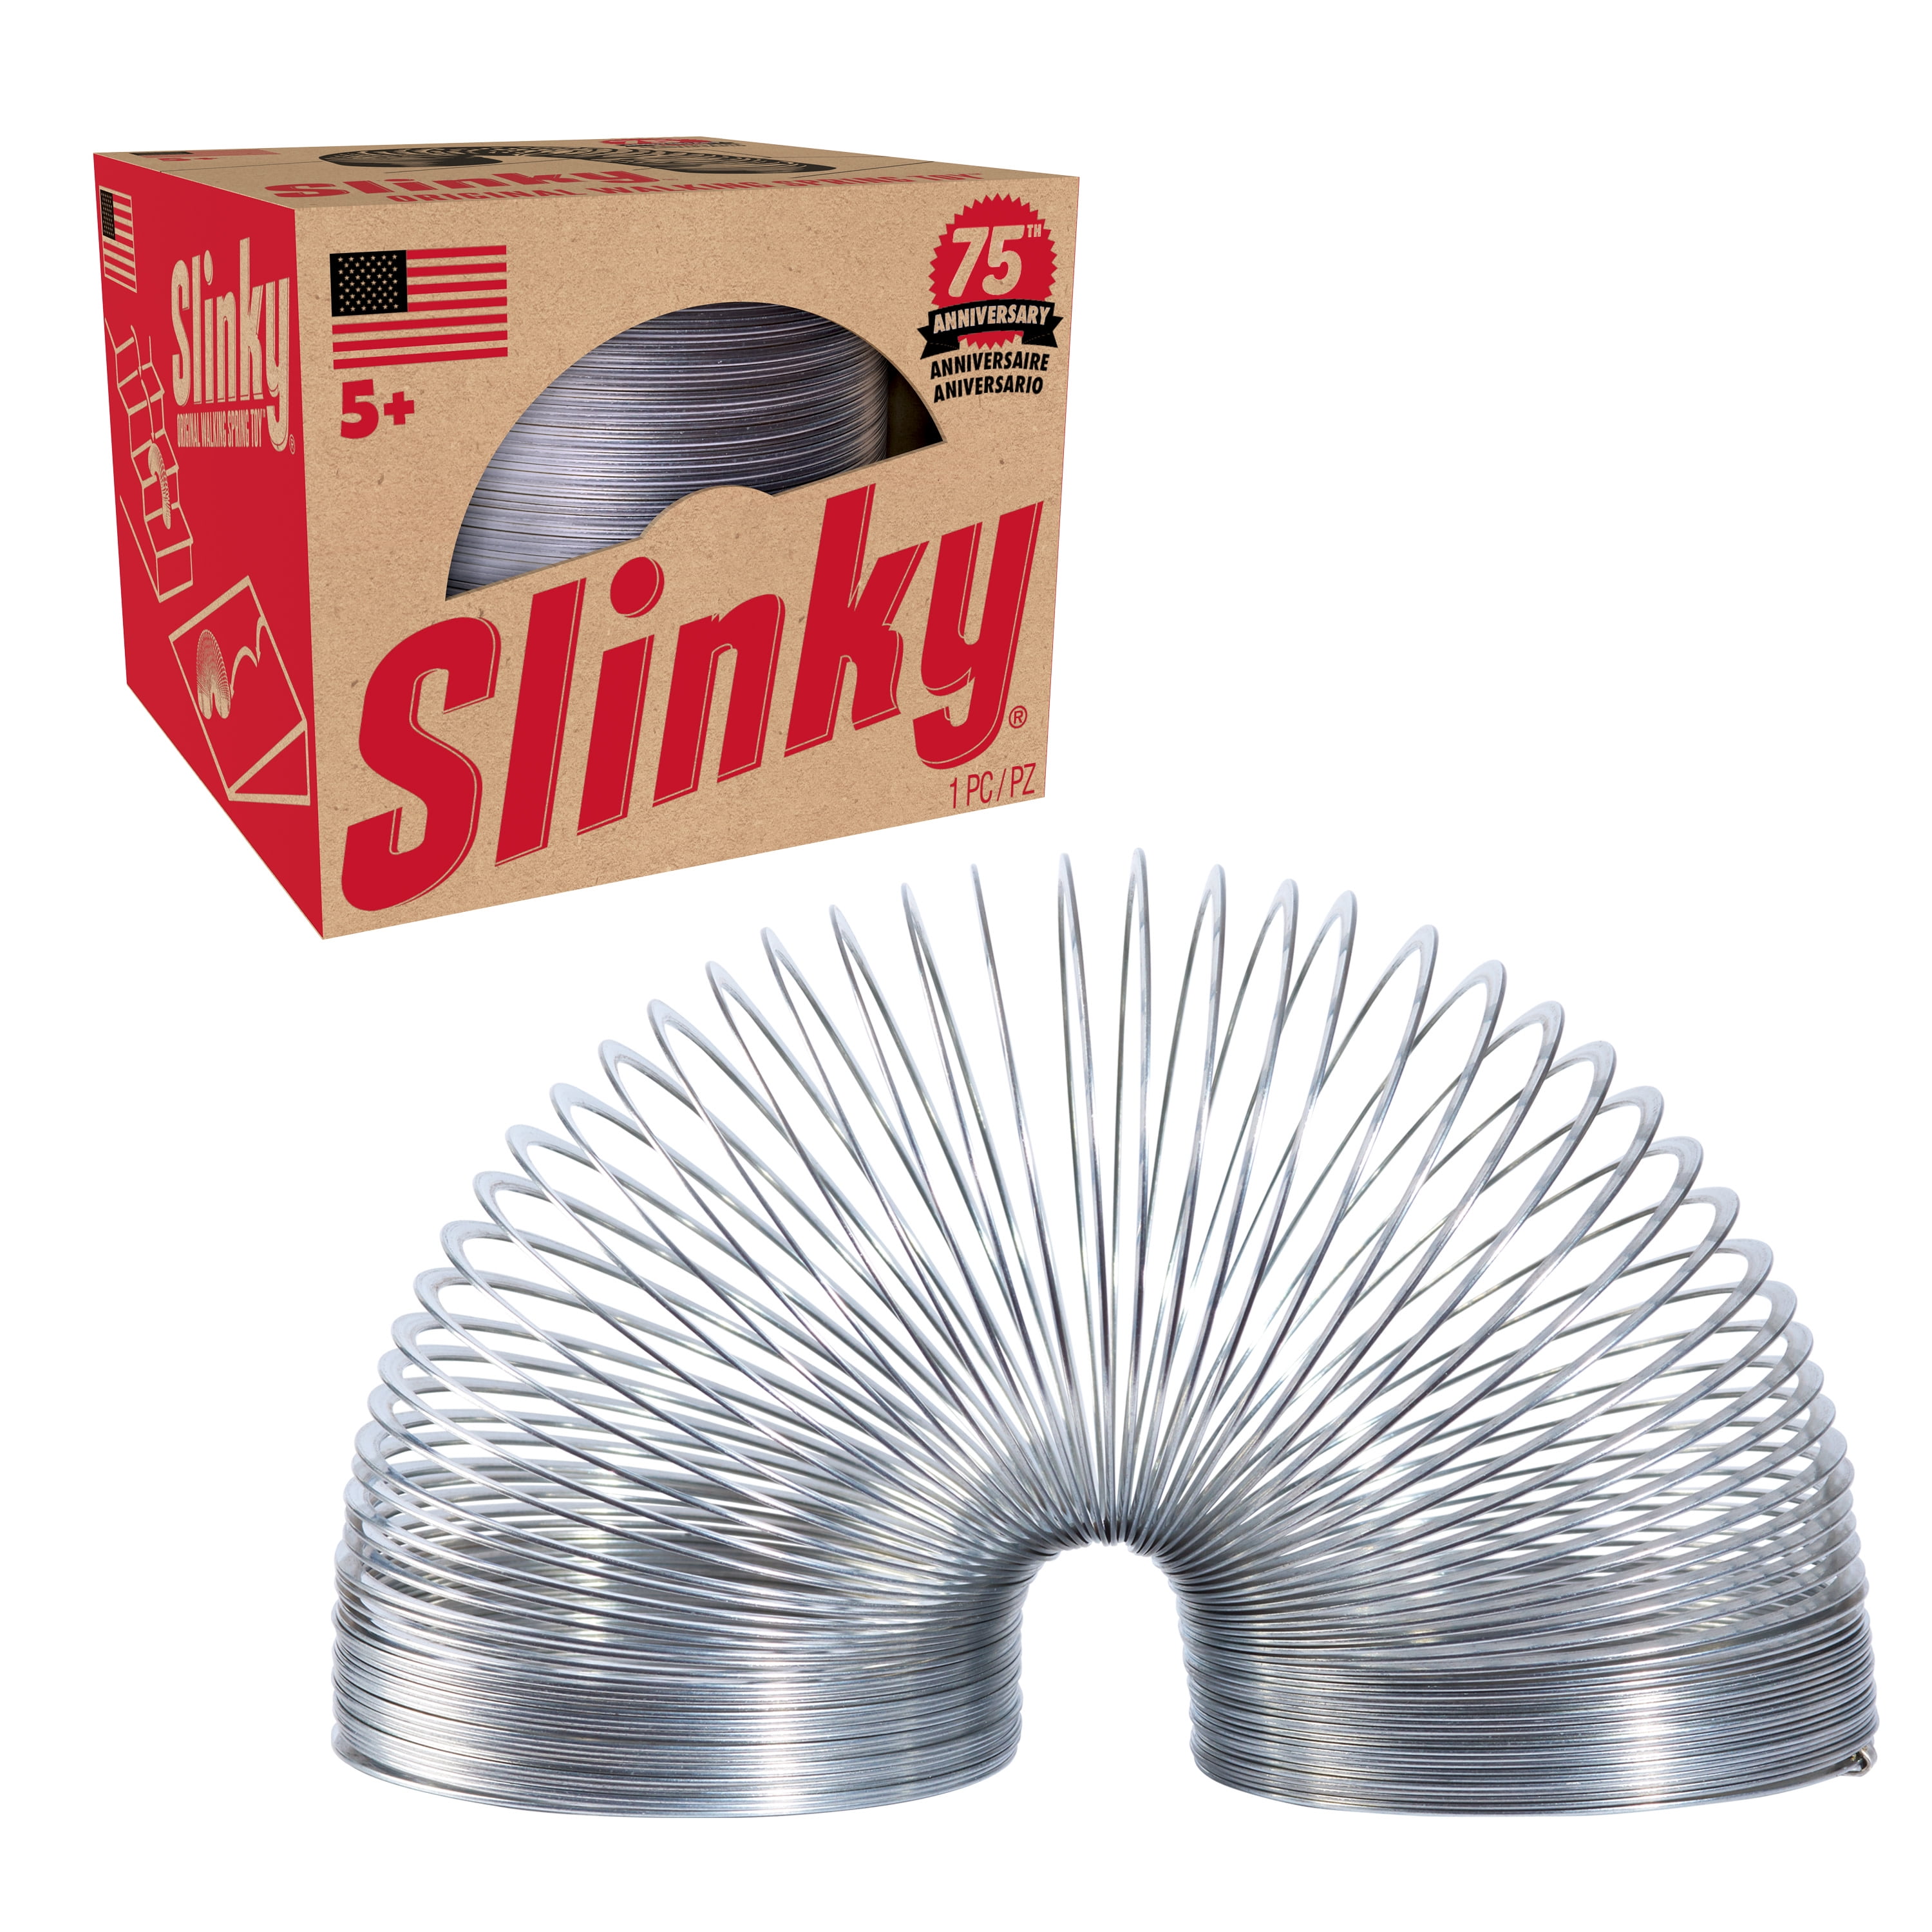 Slinky Brand Pik-Up Stiks Game Canister 25 Pieces Vintage New 